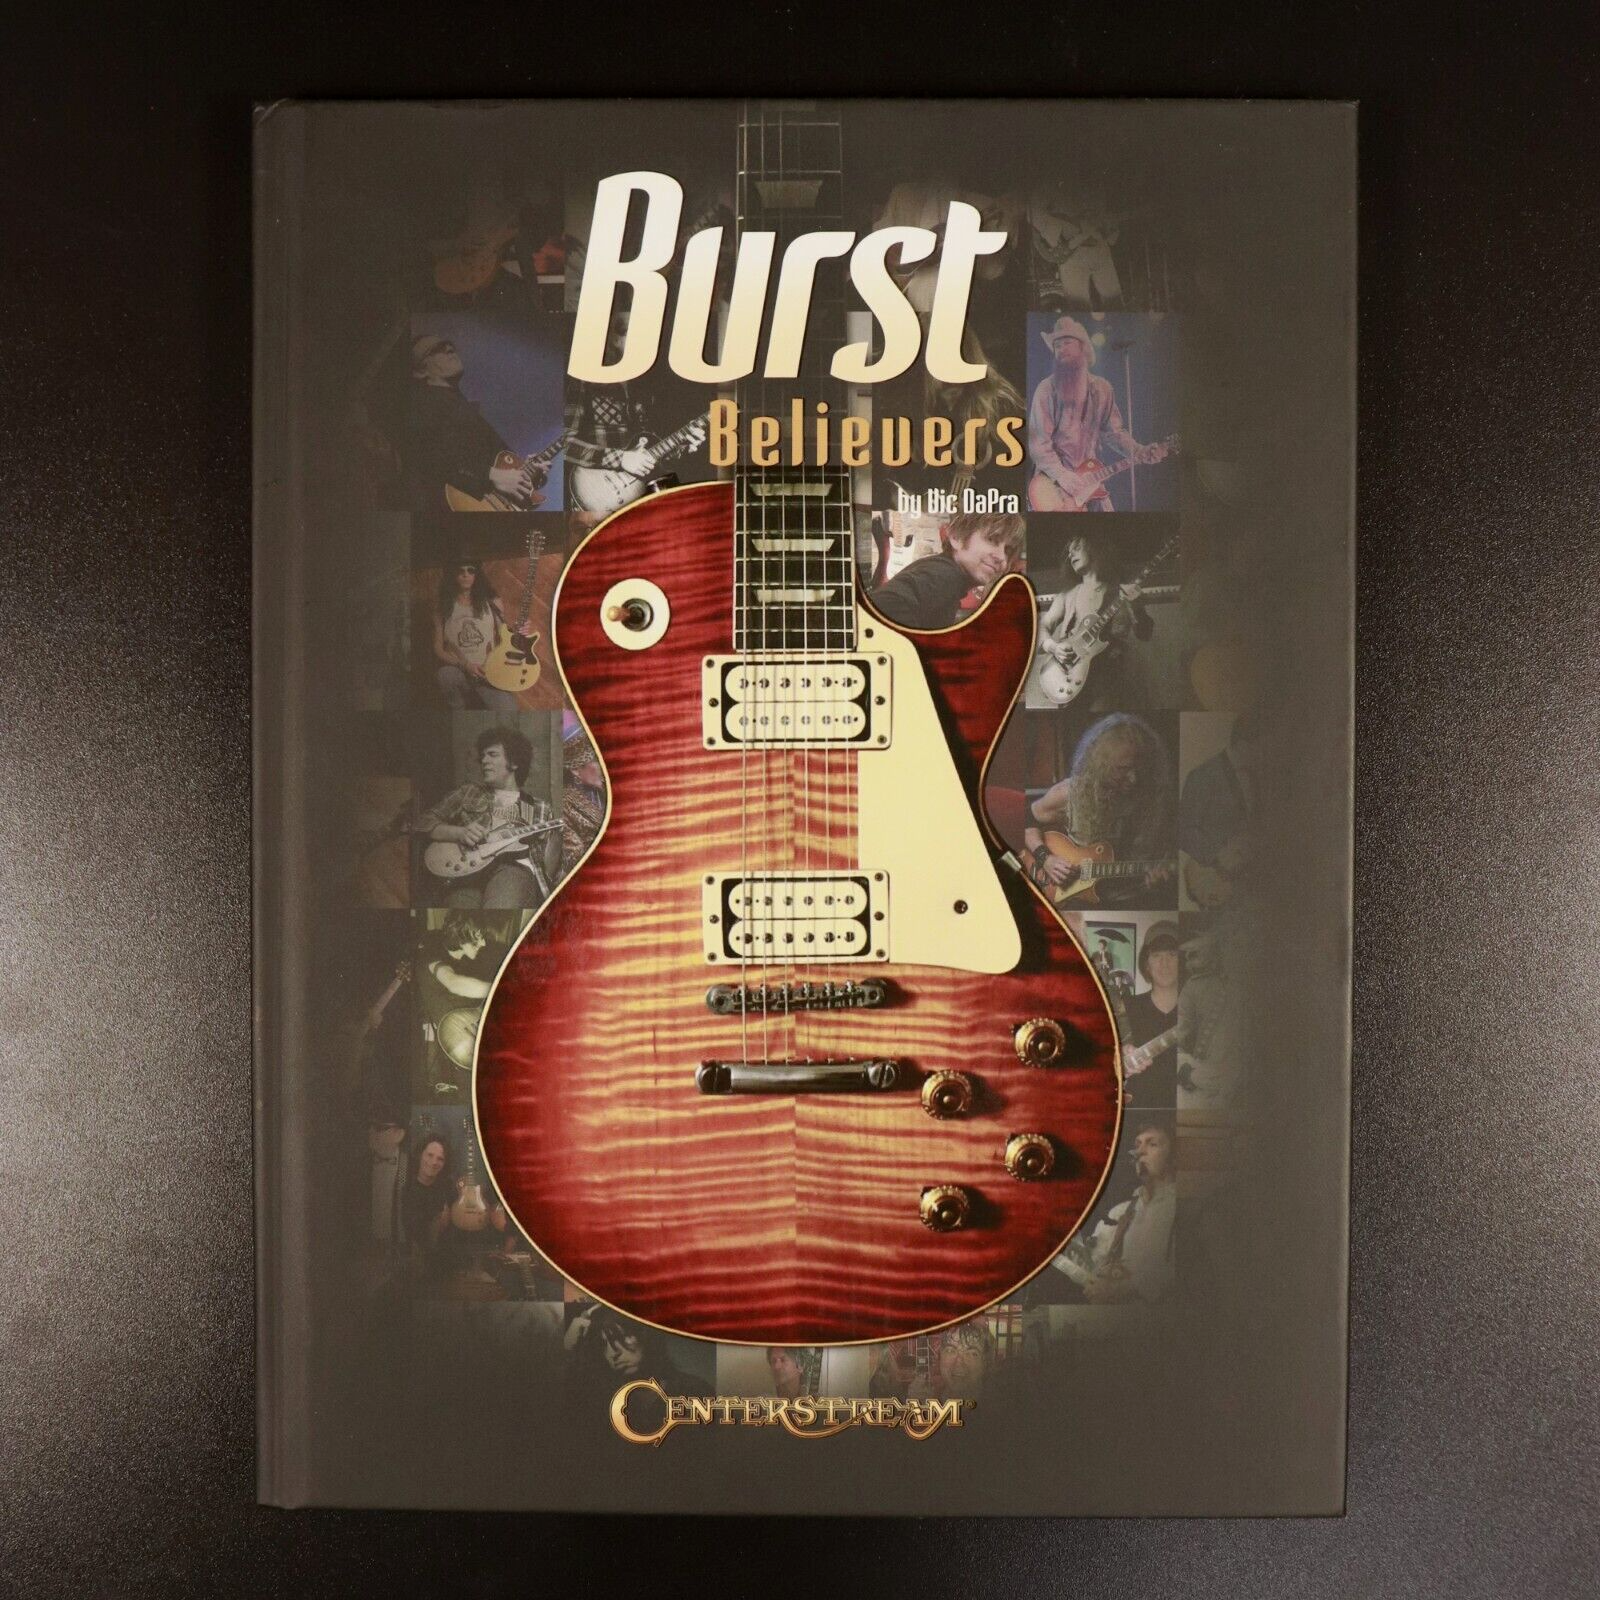 2013 Burst Believers 1 by Vic DaPra 1st Edition Gibson Les Paul Guitar Book